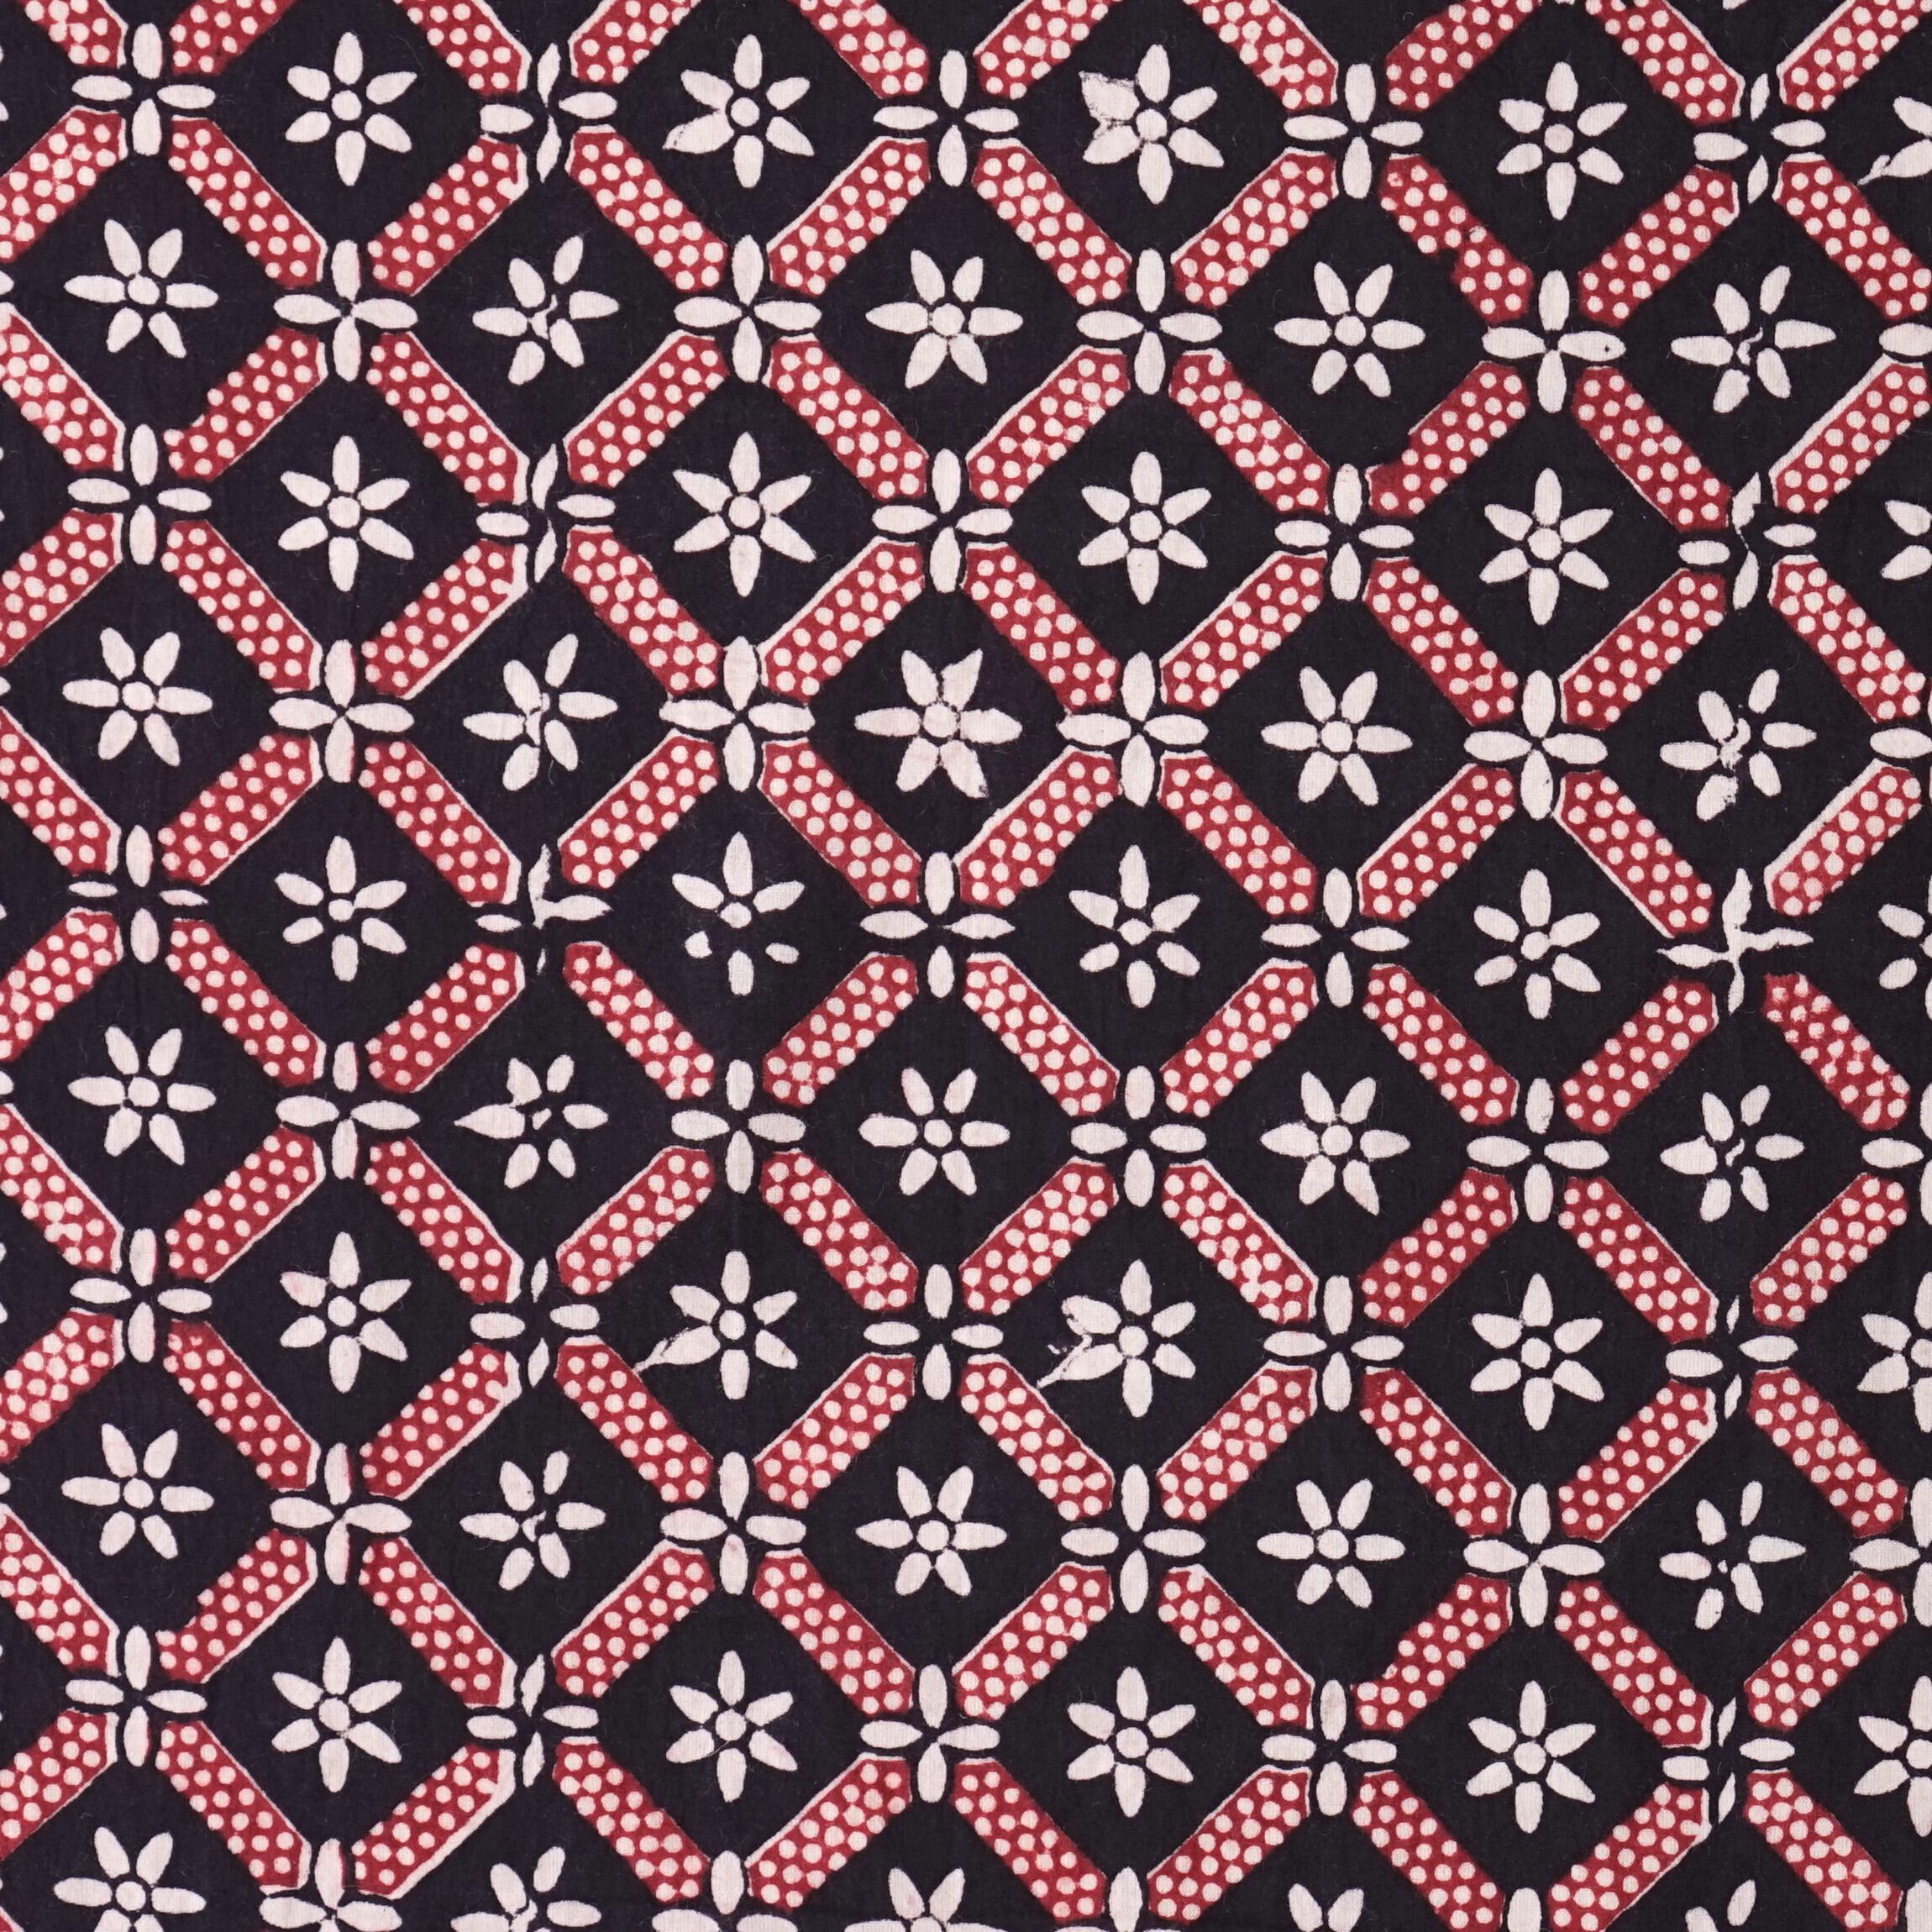 100% Block -Printed Cotton Fabric From India - Barley Design - Iron Rust Black & Alizarin Red Dyes - Flat